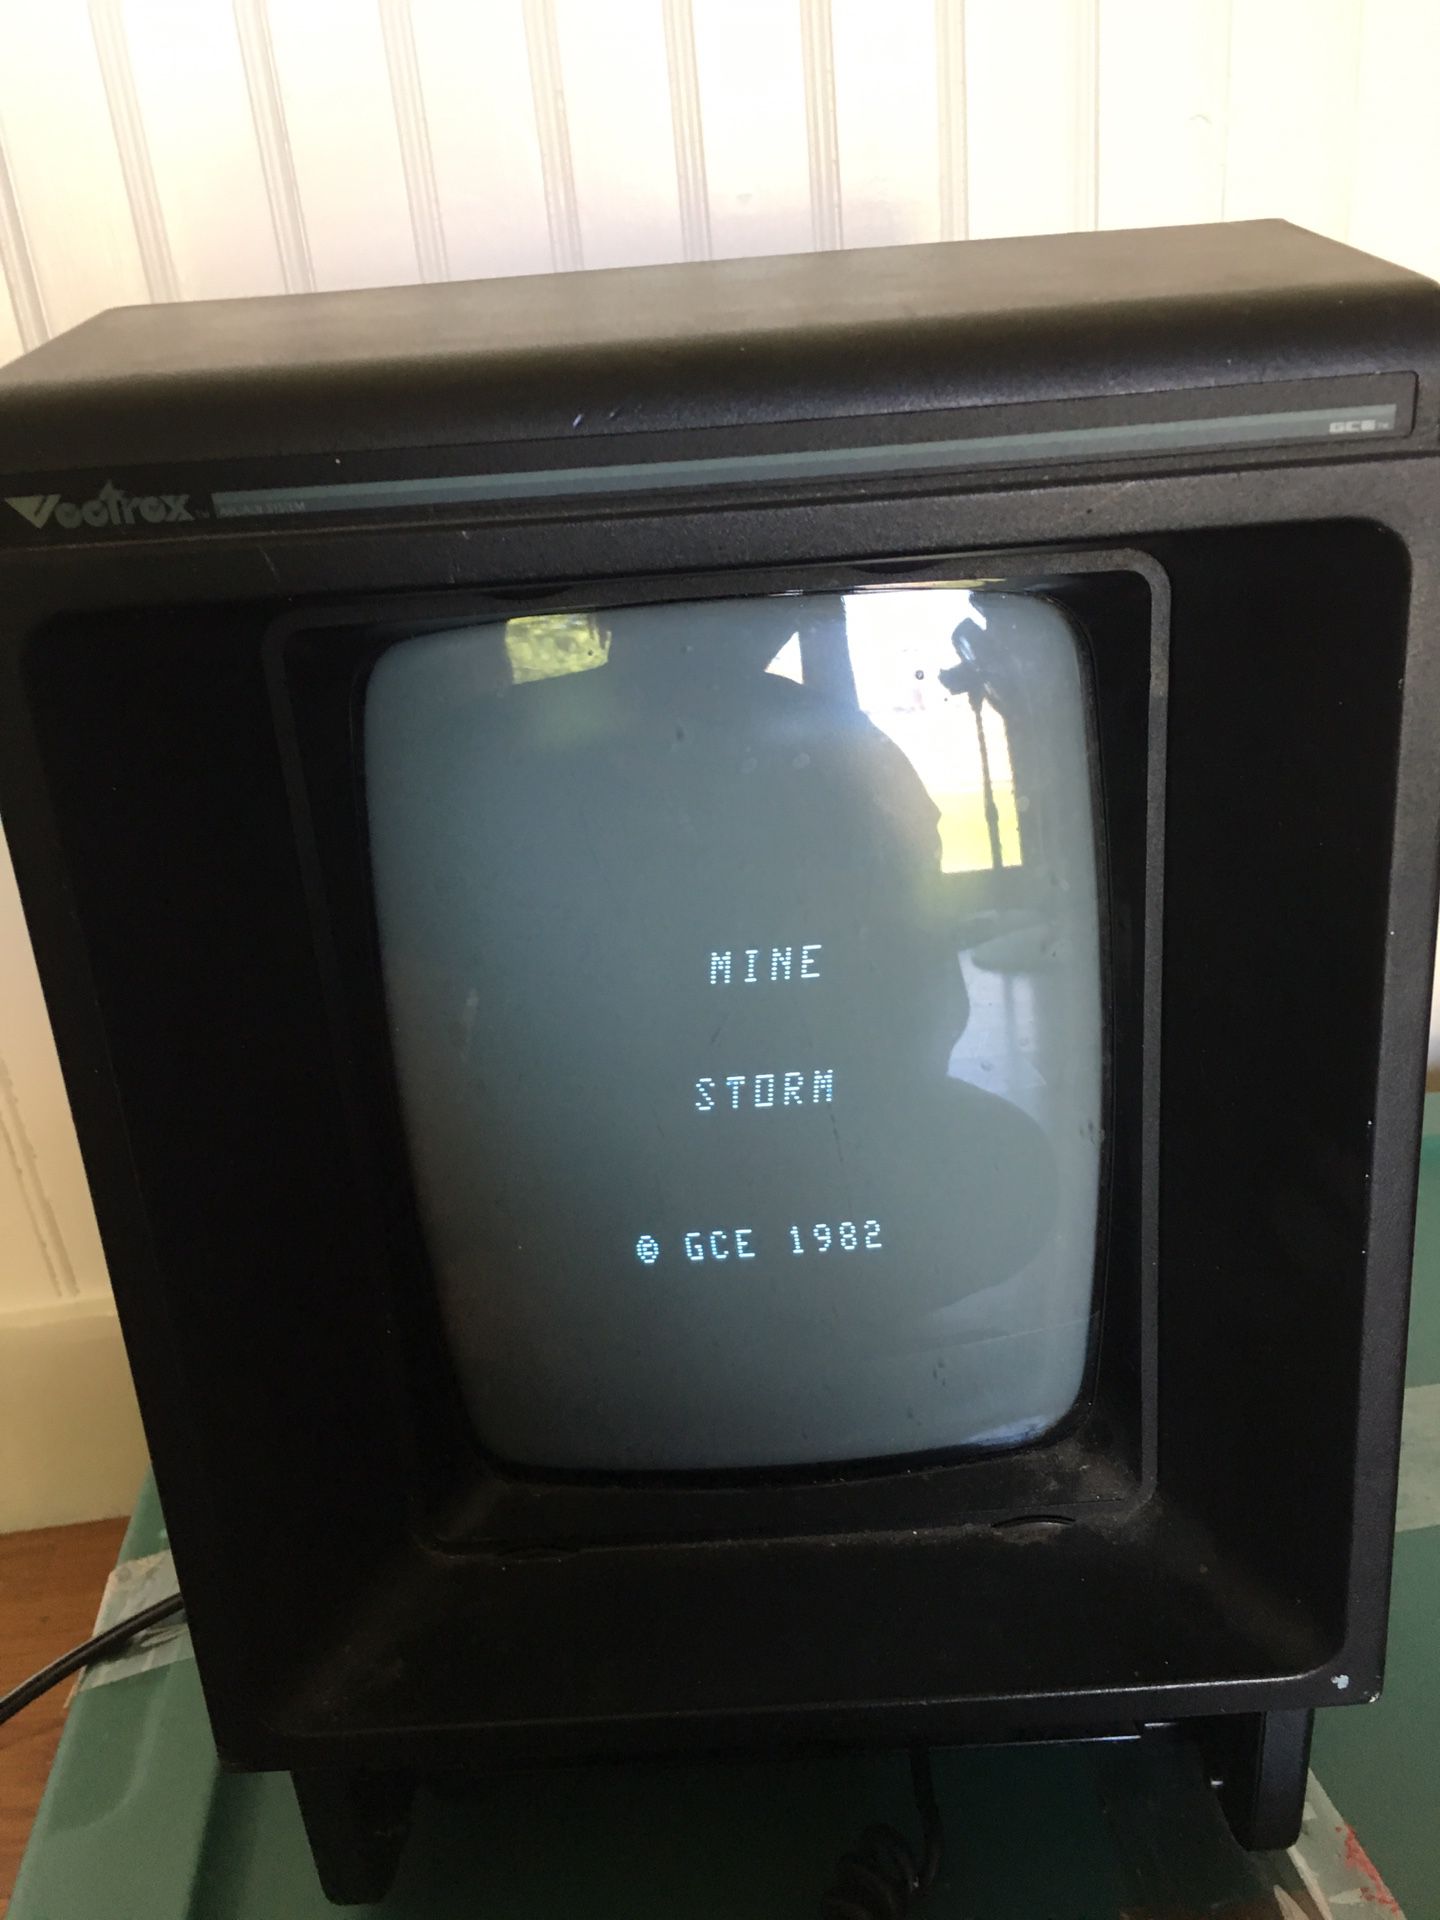 Vectrex Arcade System Video Game Console